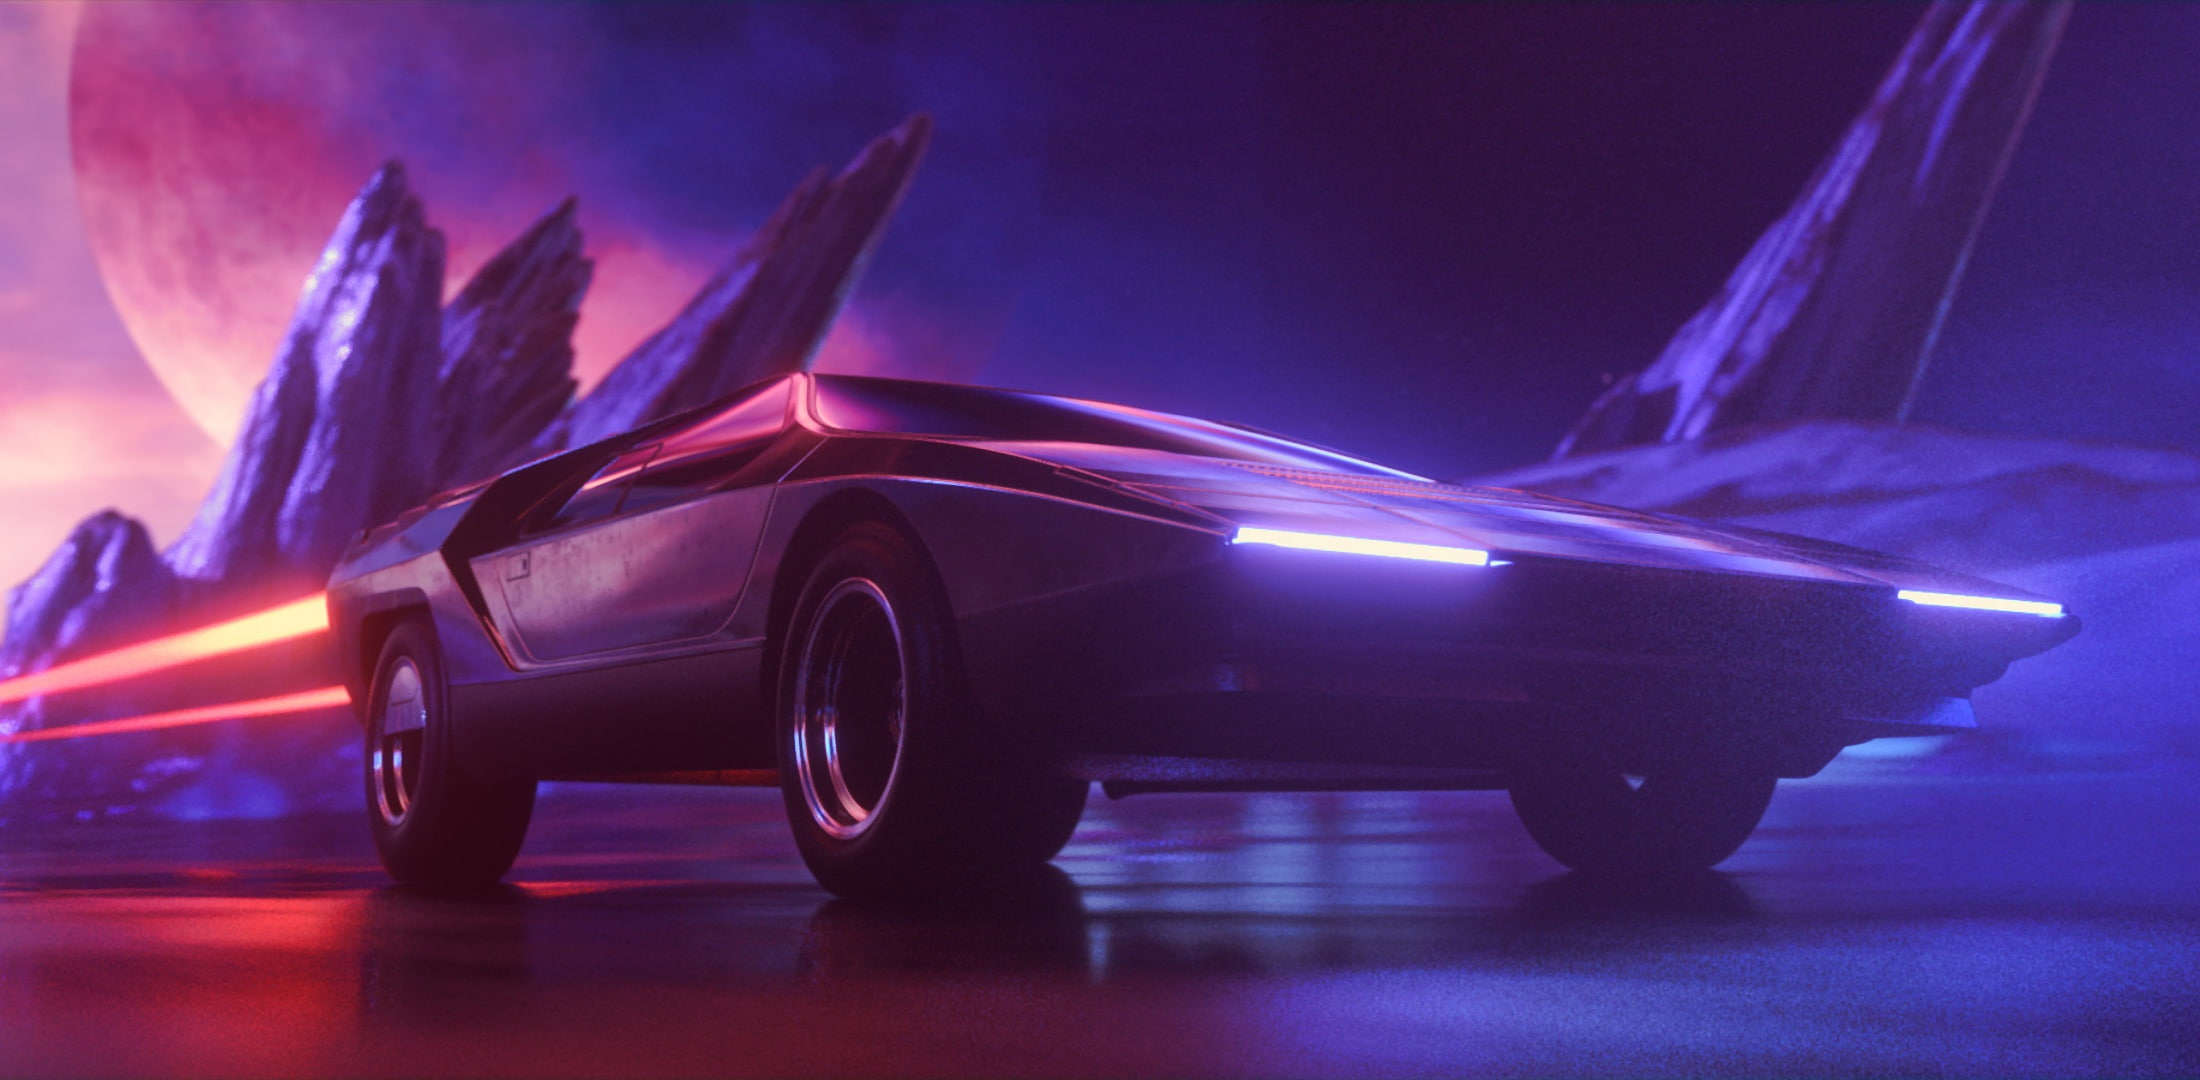 Synthwave wallpaper, Auto, Music, Neon, Machine, Background, Synth, Retrowave